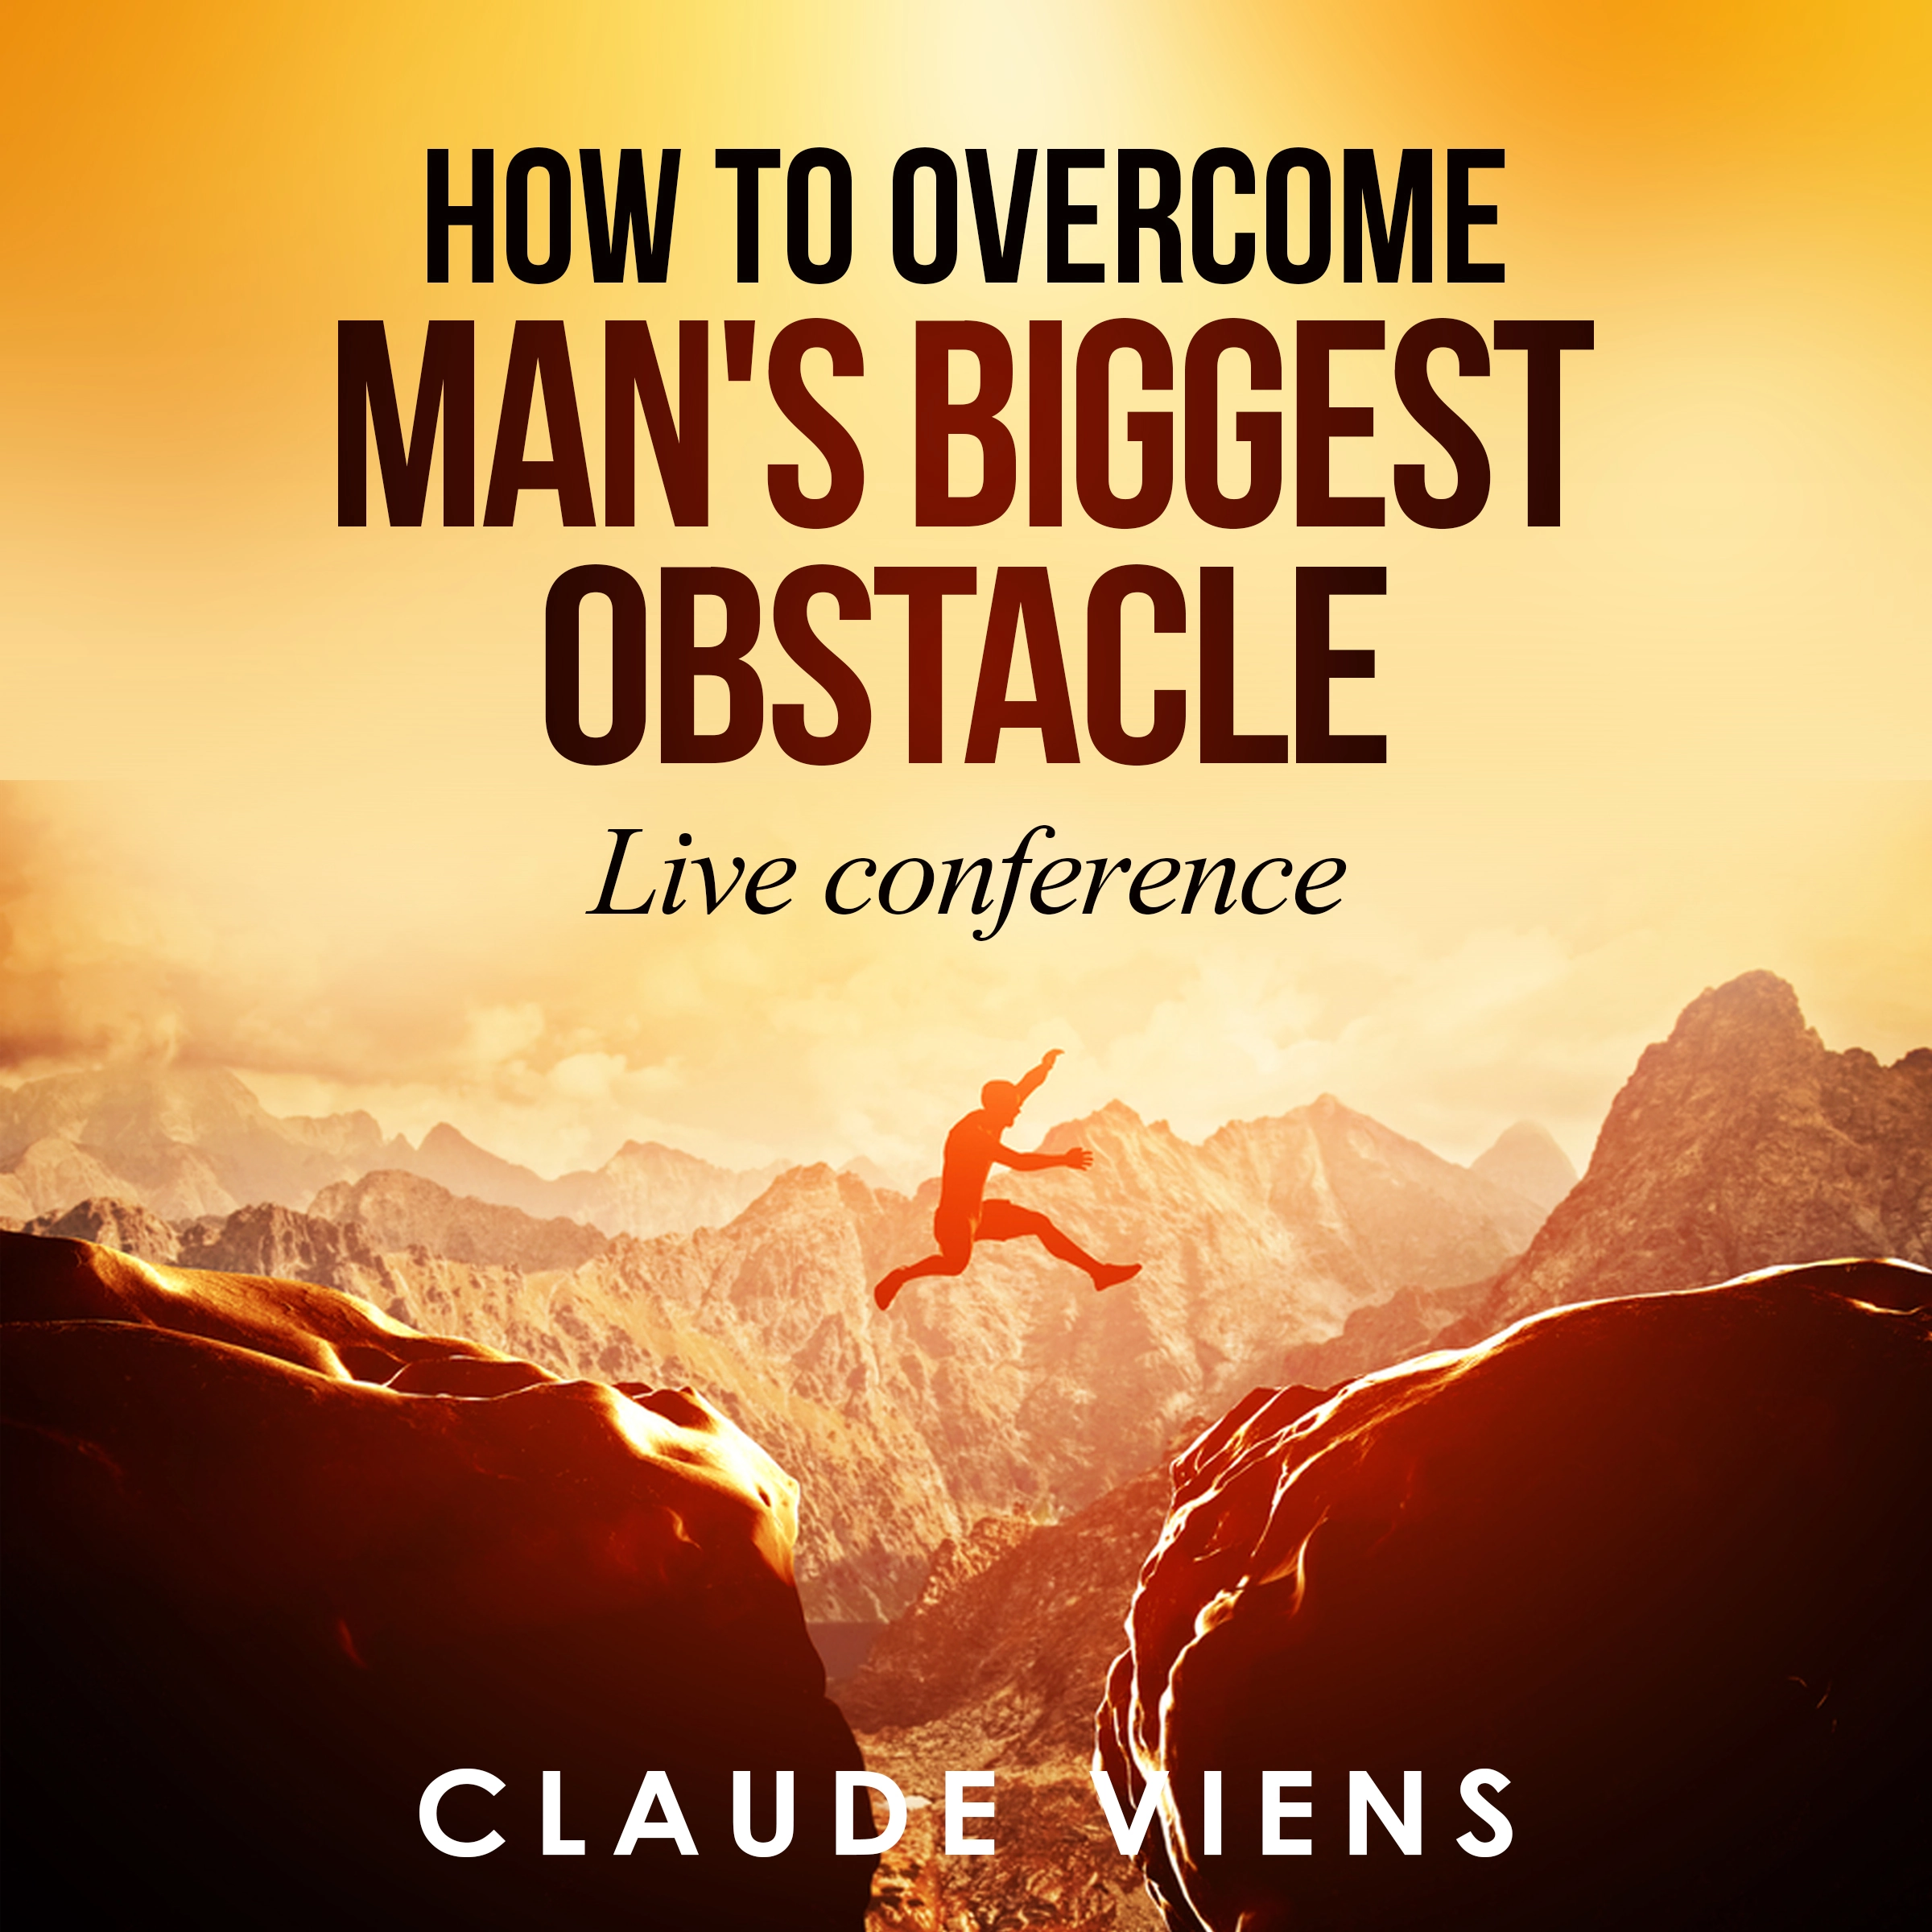 How To Overcome Man's Biggest Obstacle Audiobook by Claude Viens